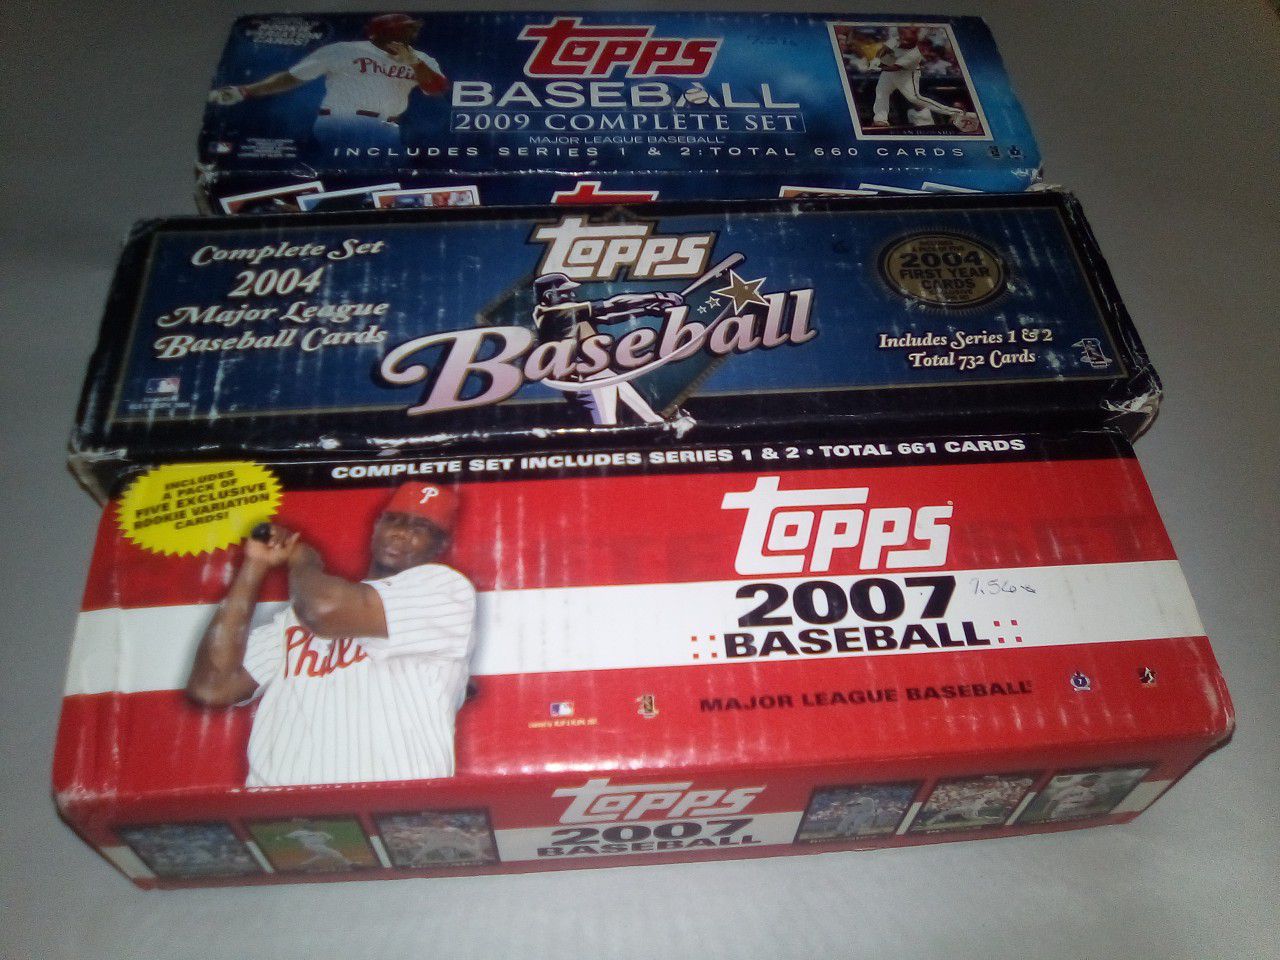 3 Complete sets of baseball cards